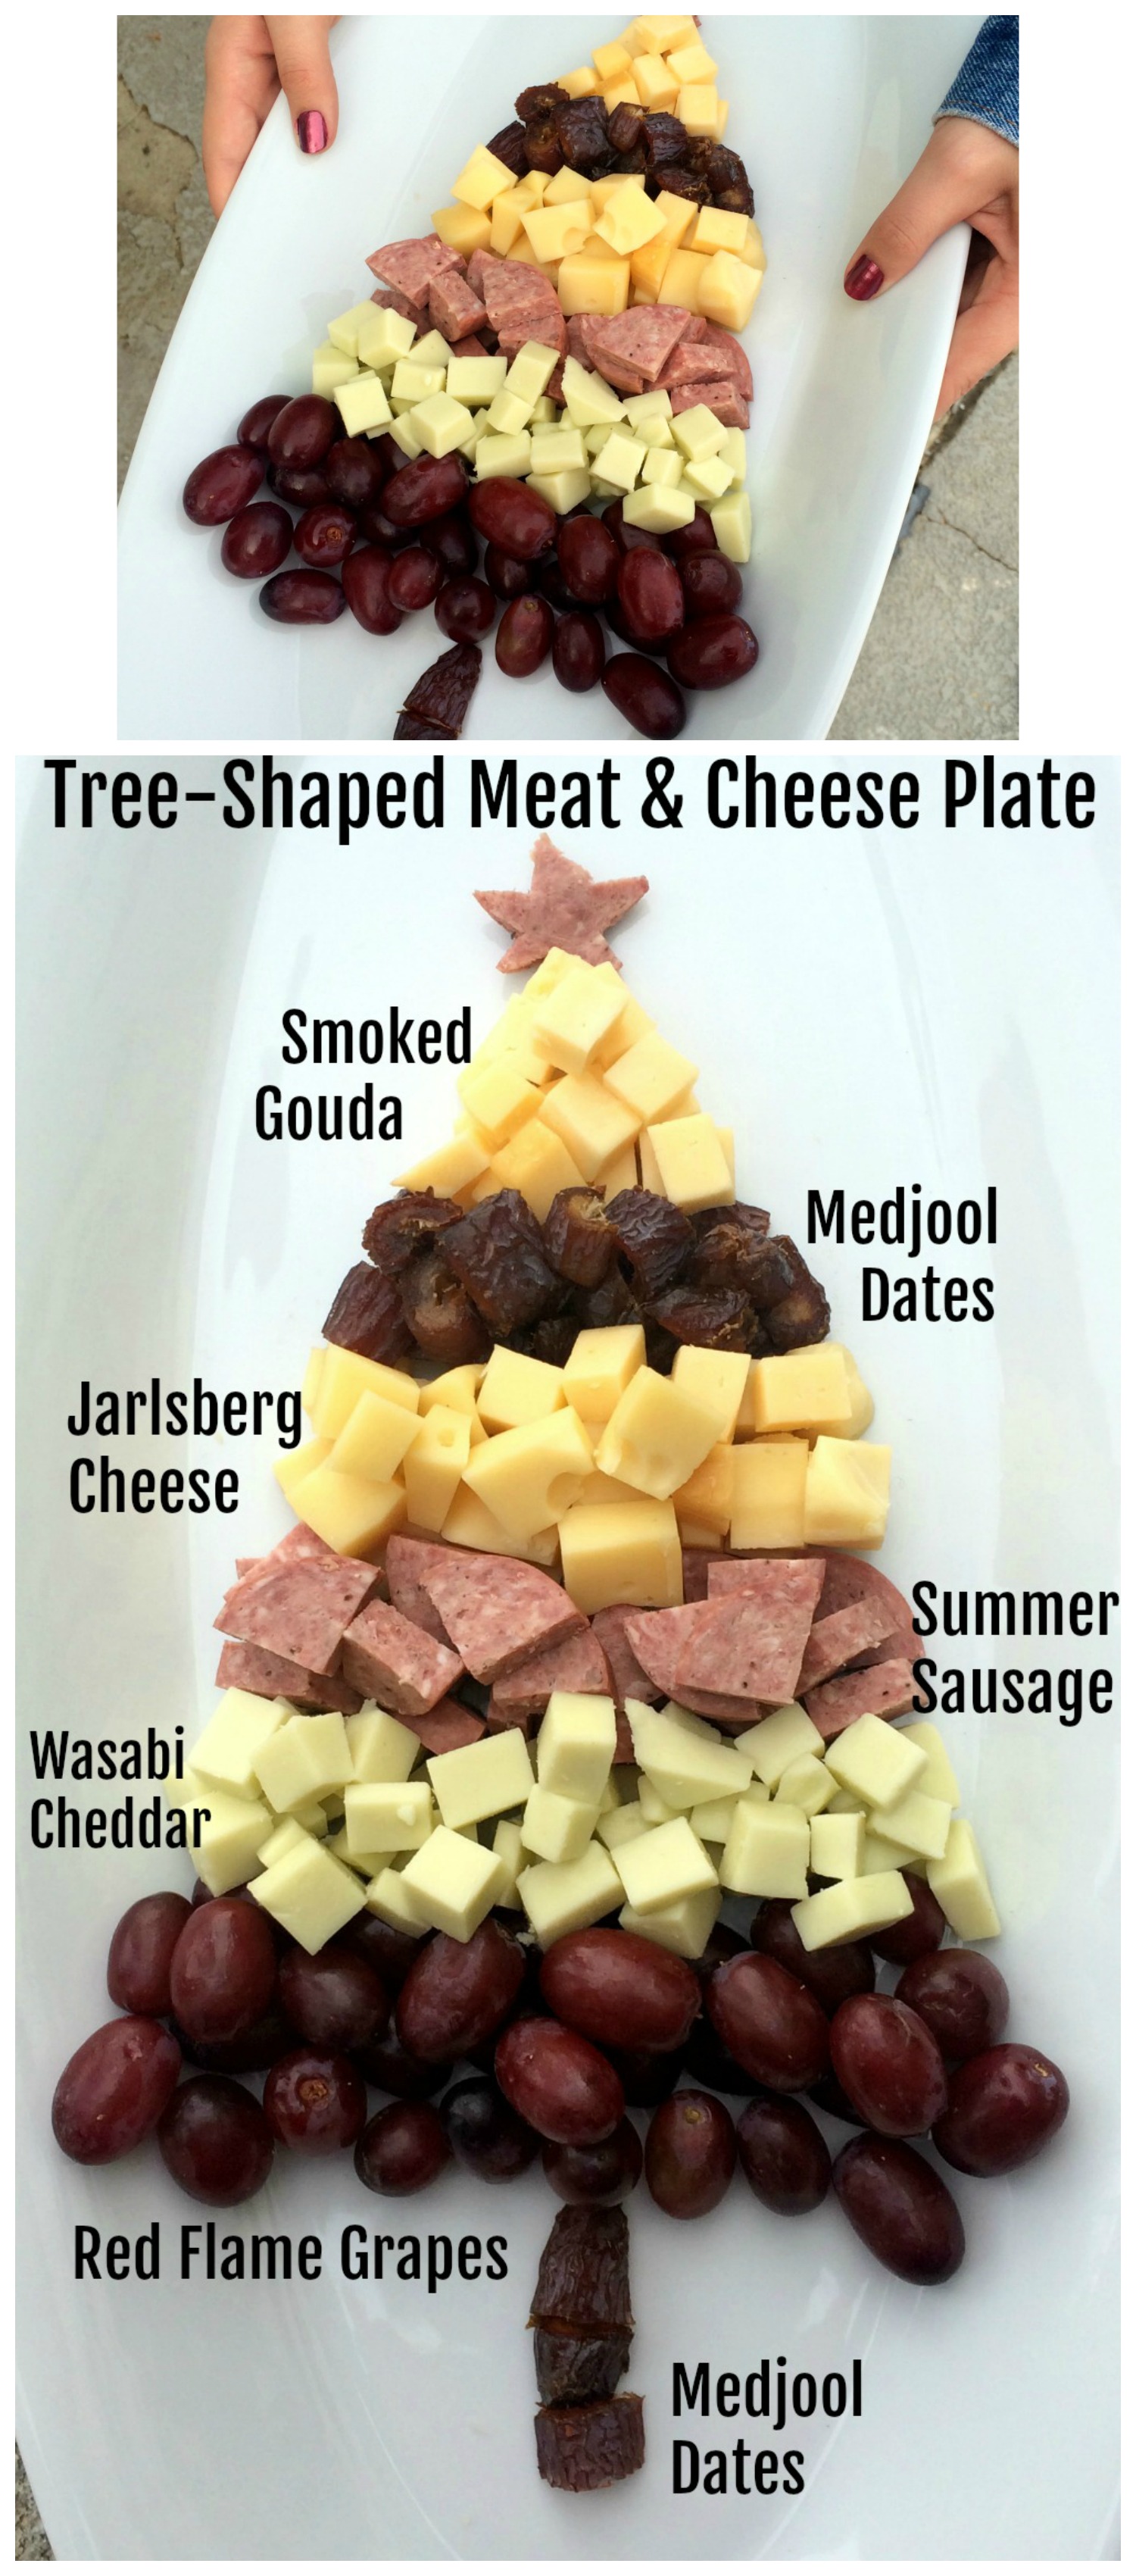 Tree-Shaped Meat and Cheese Plate: Whether for the holidays or any day, it's fun to easy to create a meat and cheese plate in the shape of a tree. Any charcuterie board is twice as festive if you *spruce* it up! (See what I did there?)  #meatandcheeseplate #charcuterieboard #appetizerplate #shockinglydelicious #holidaycheeseboard